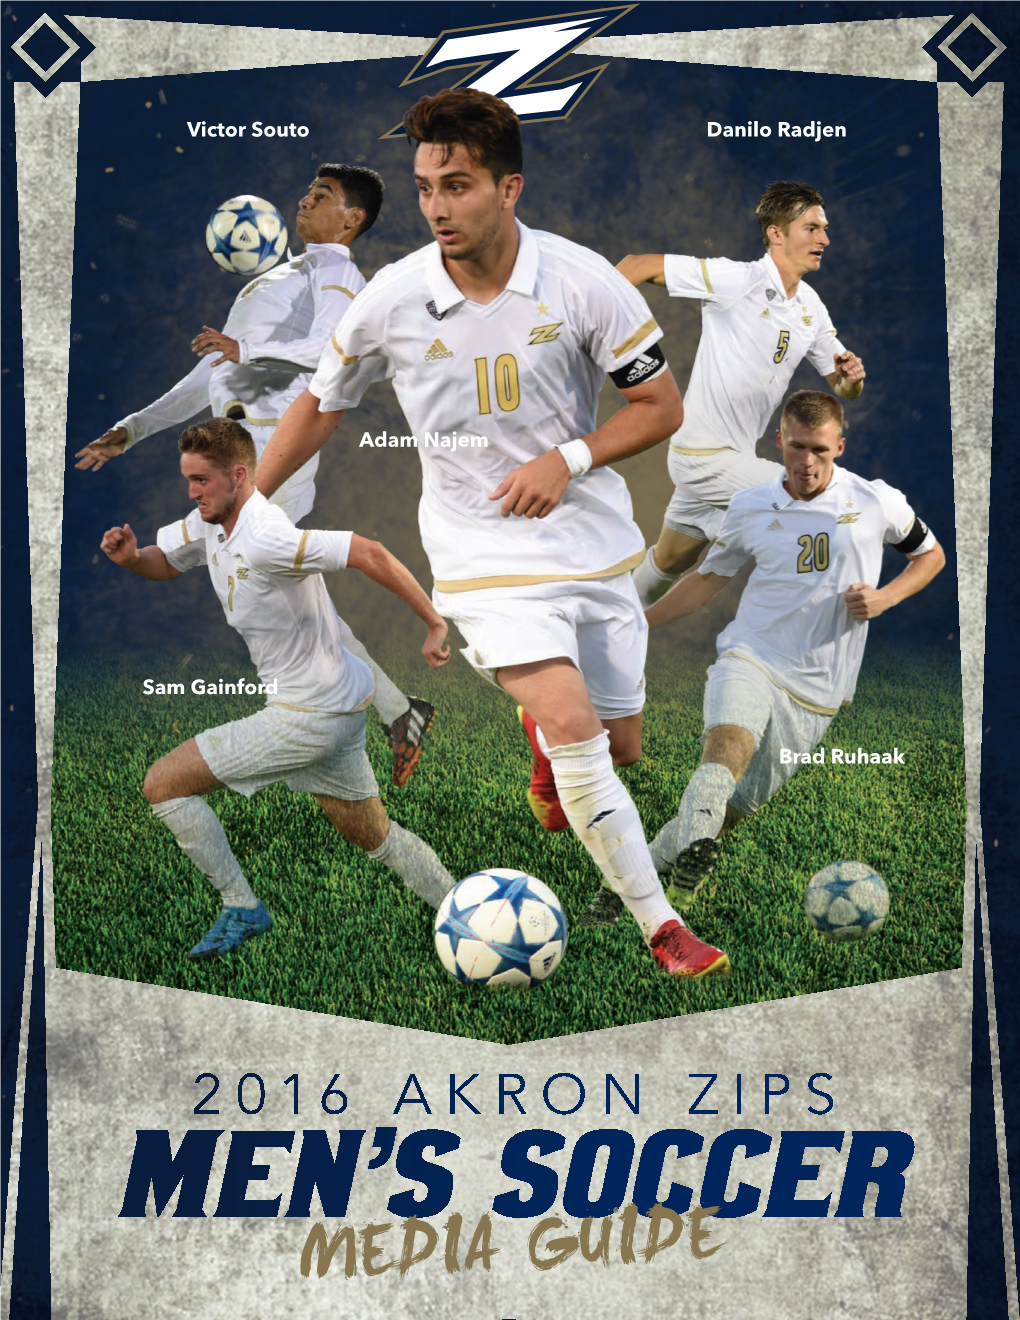 2016 Akron Zips Men’S Soccer Table of Contents